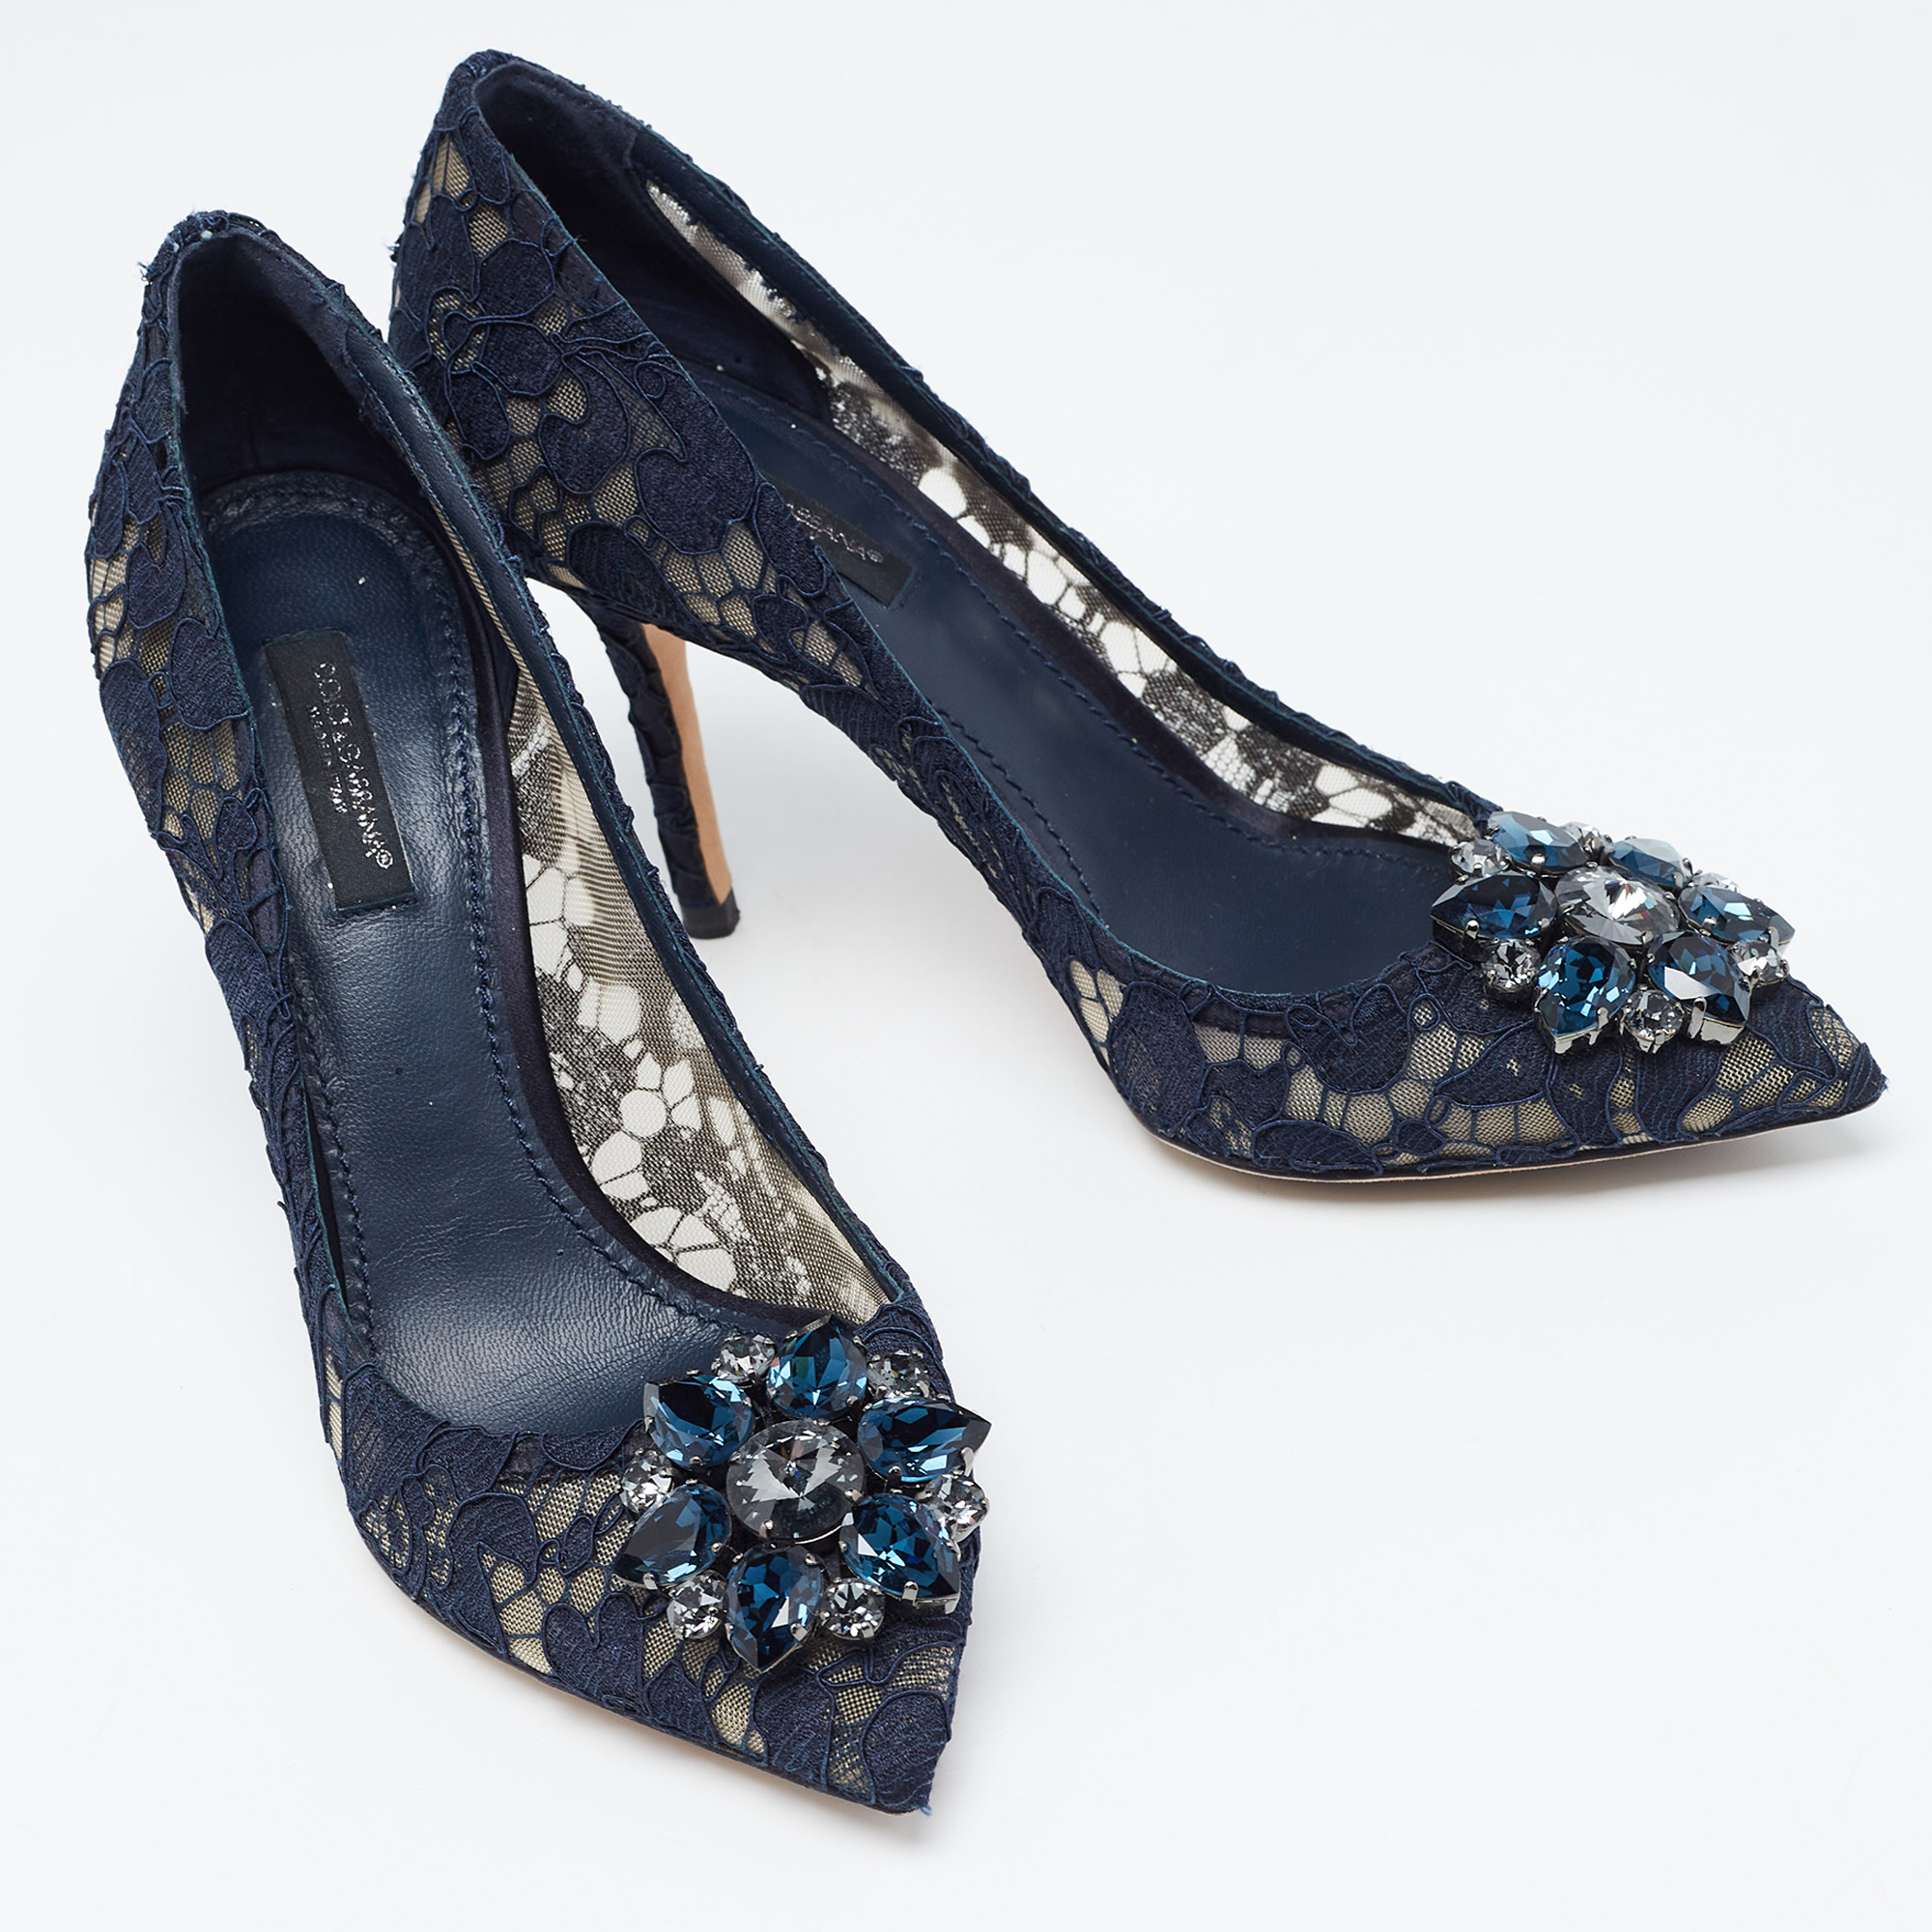 Dolce & Gabbana Navy Blue Lace And Mesh Bellucci Pumps Size 37.5